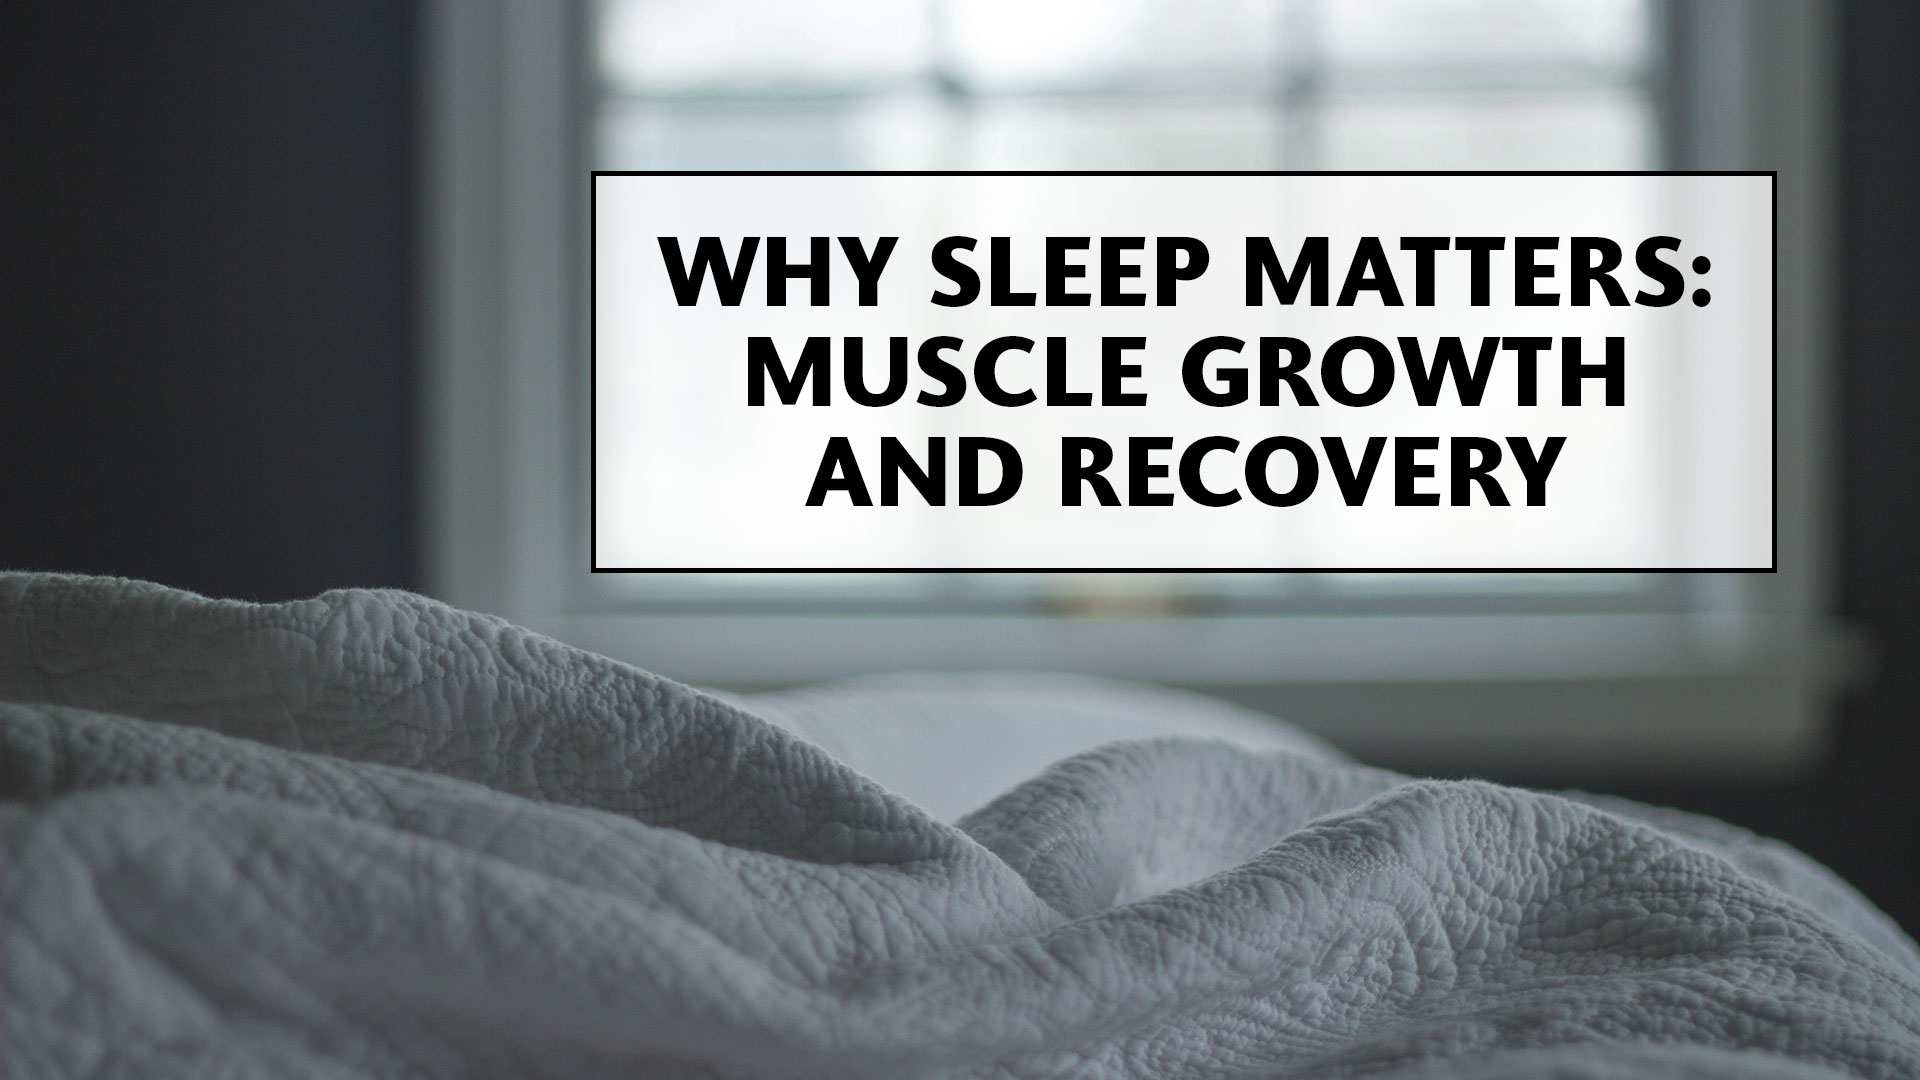 Why is sleep so important for muscle growth and recovery?